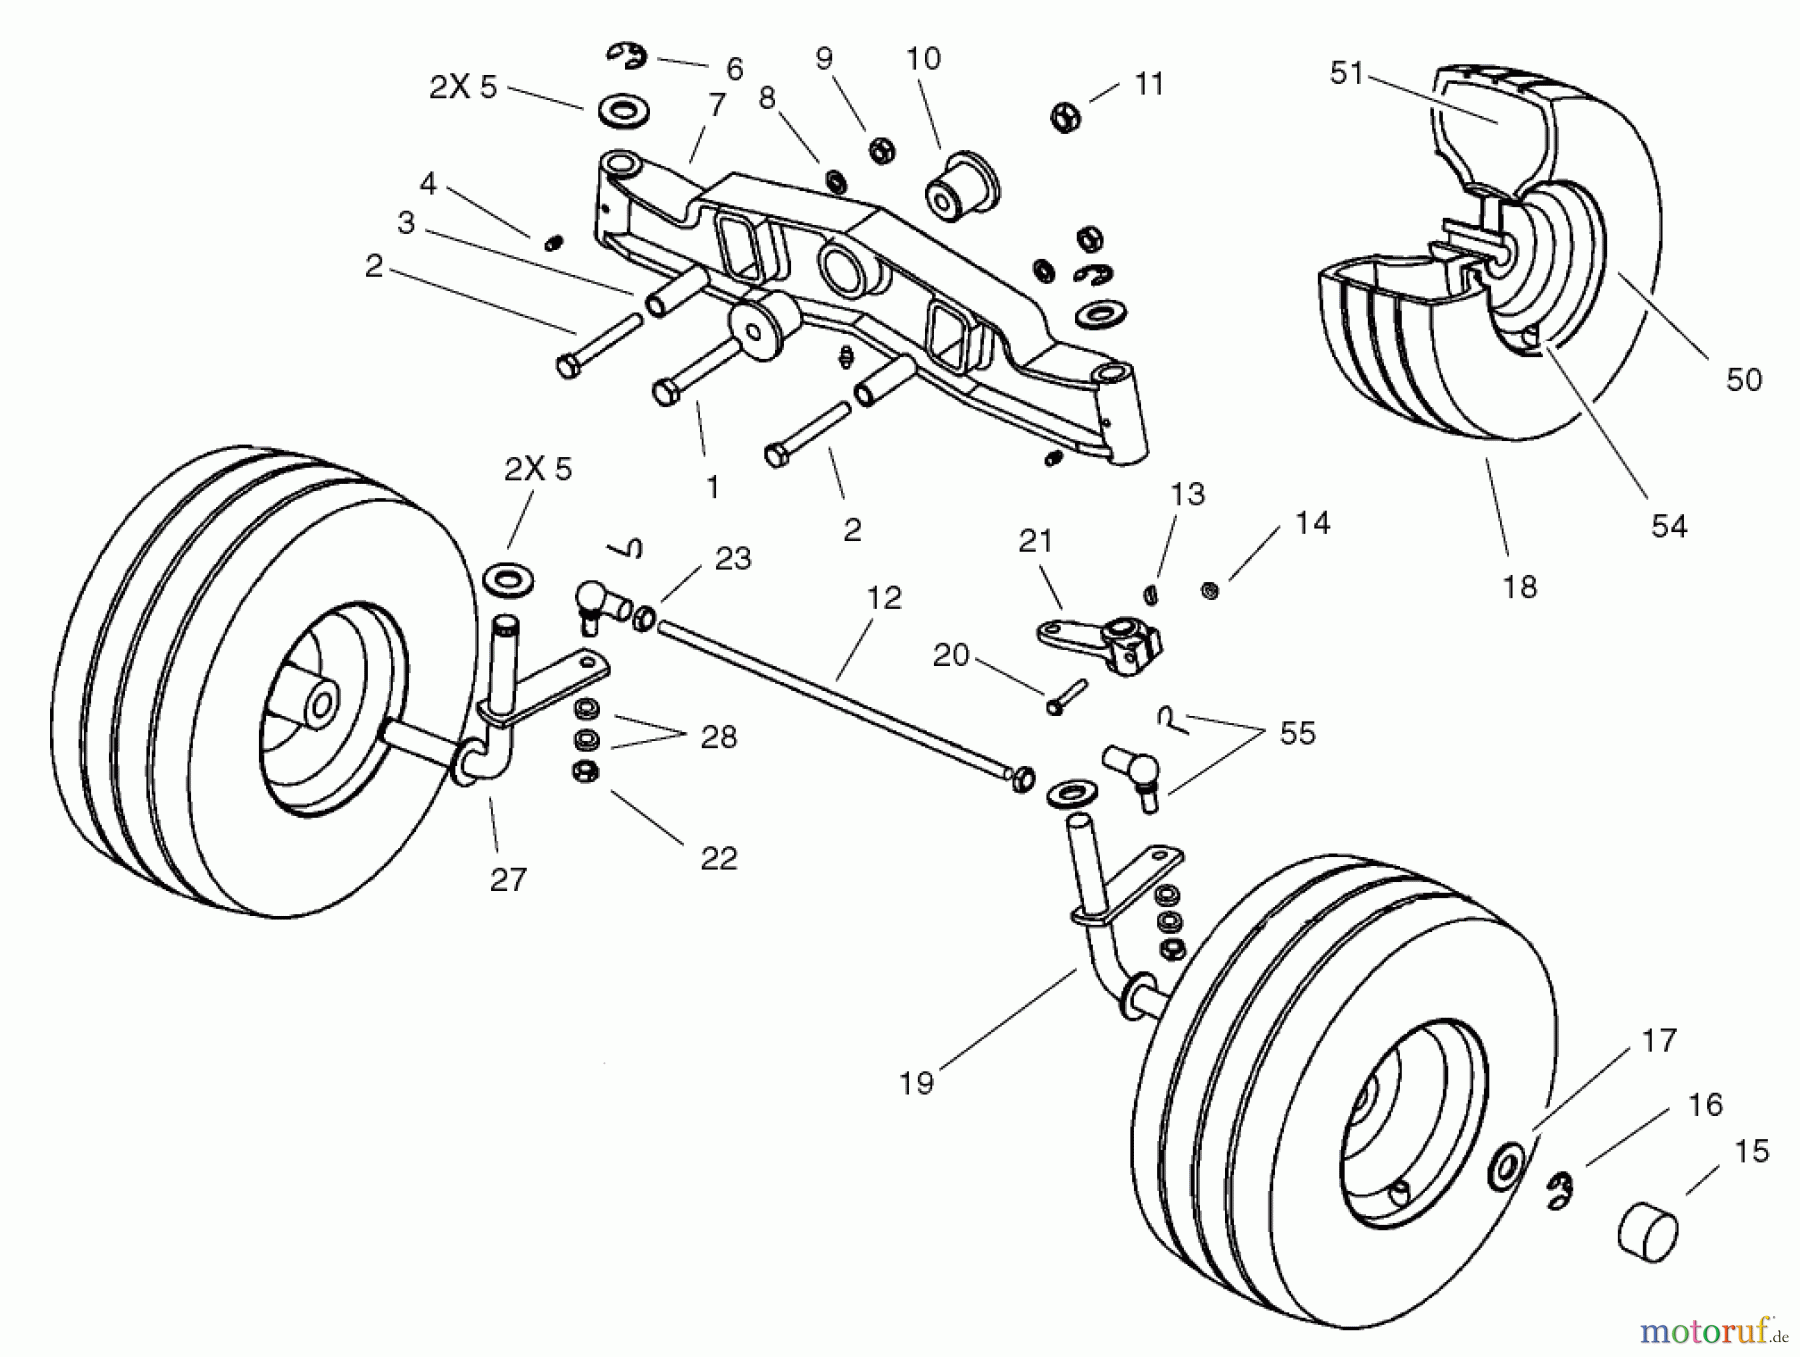  Toro Neu Mowers, Lawn & Garden Tractor Seite 1 74570 (170-DH) - Toro 170-DH Lawn Tractor, 2002 (220000001-220999999) FRONT AXLE ASSEMBLY